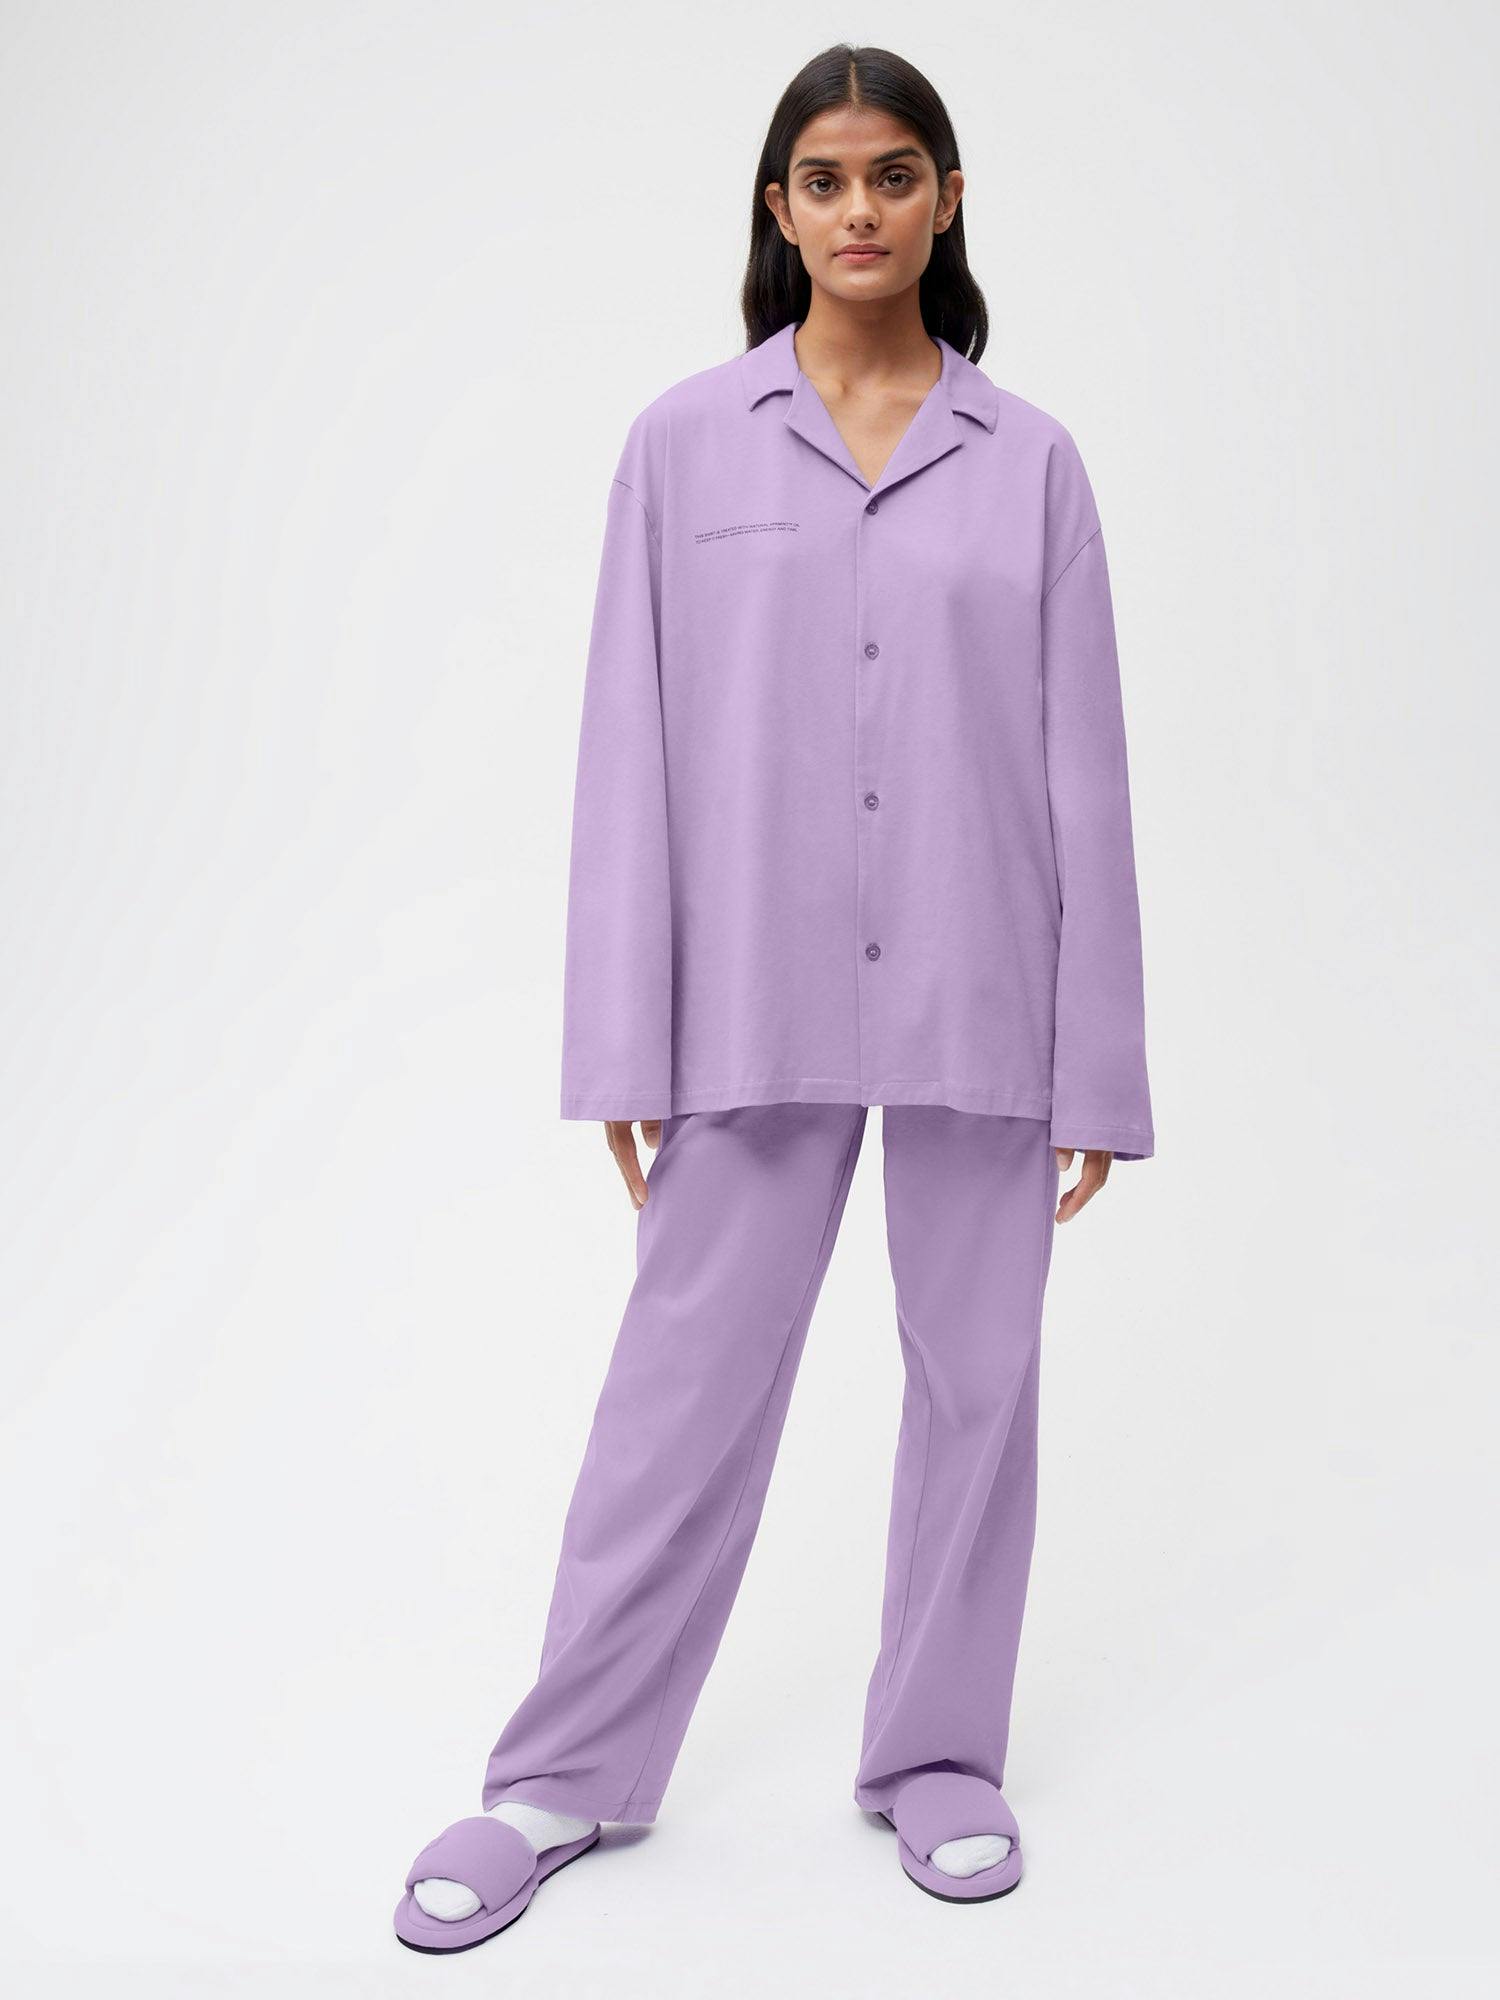 https://cdn.shopify.com/s/files/1/0035/1309/0115/products/Organic-Cotton-Pajama-Loose-Pant-Orchid-Purple-Female-1.jpg?v=1662476129